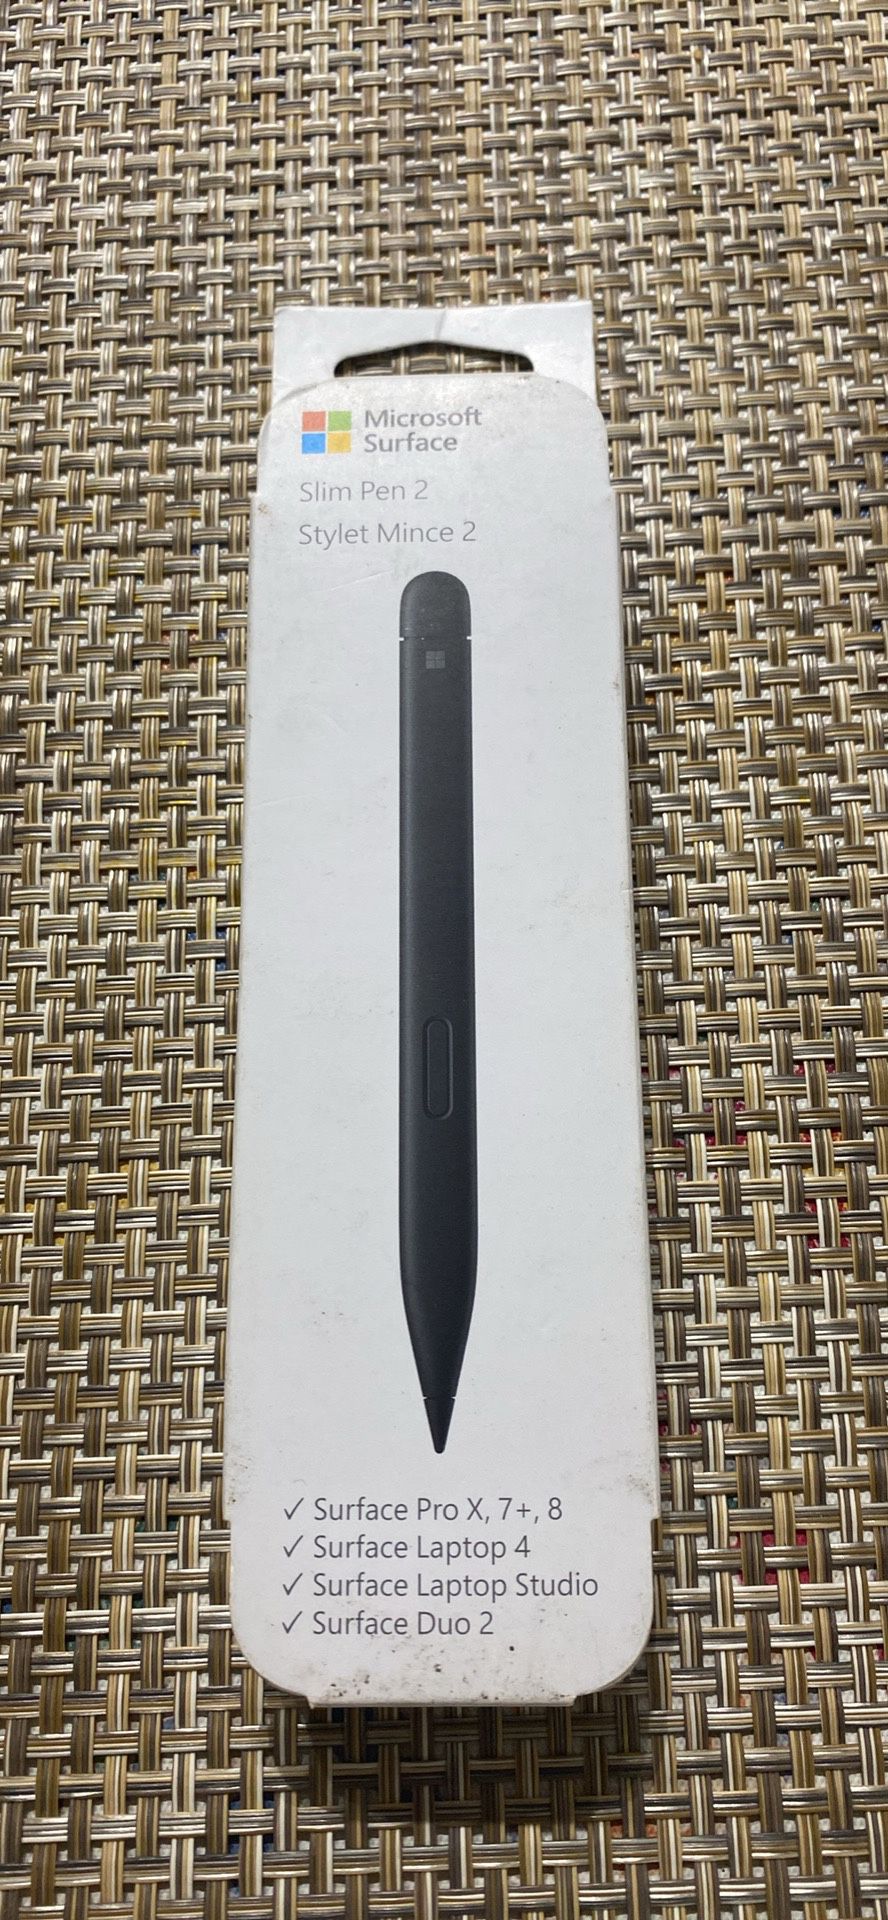 Microsoft Surface pen Stylet - Never Opened $80